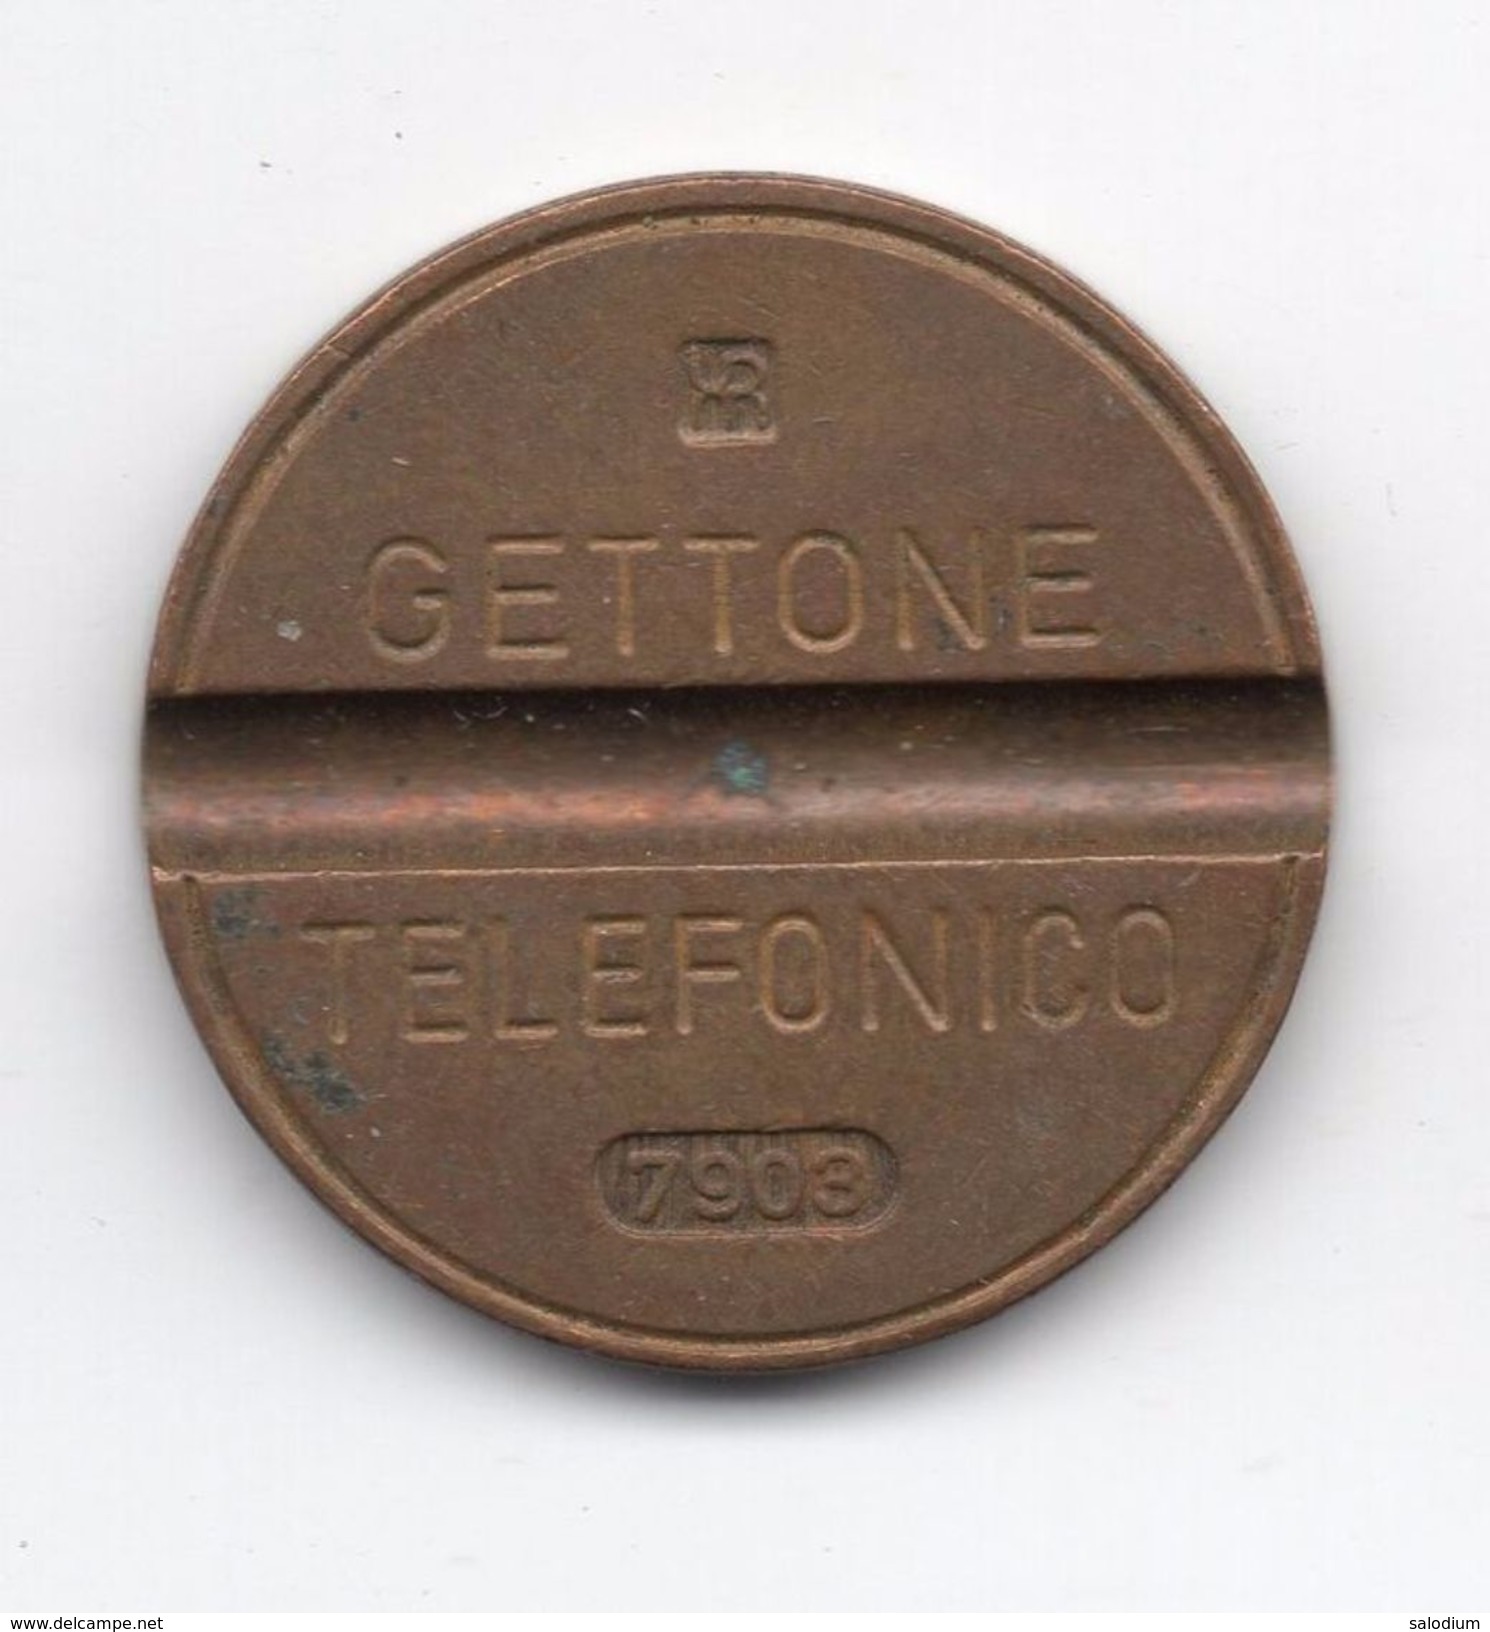 Gettone Telefonico 7903 Token Telephone - (Id-625) - Professionals/Firms